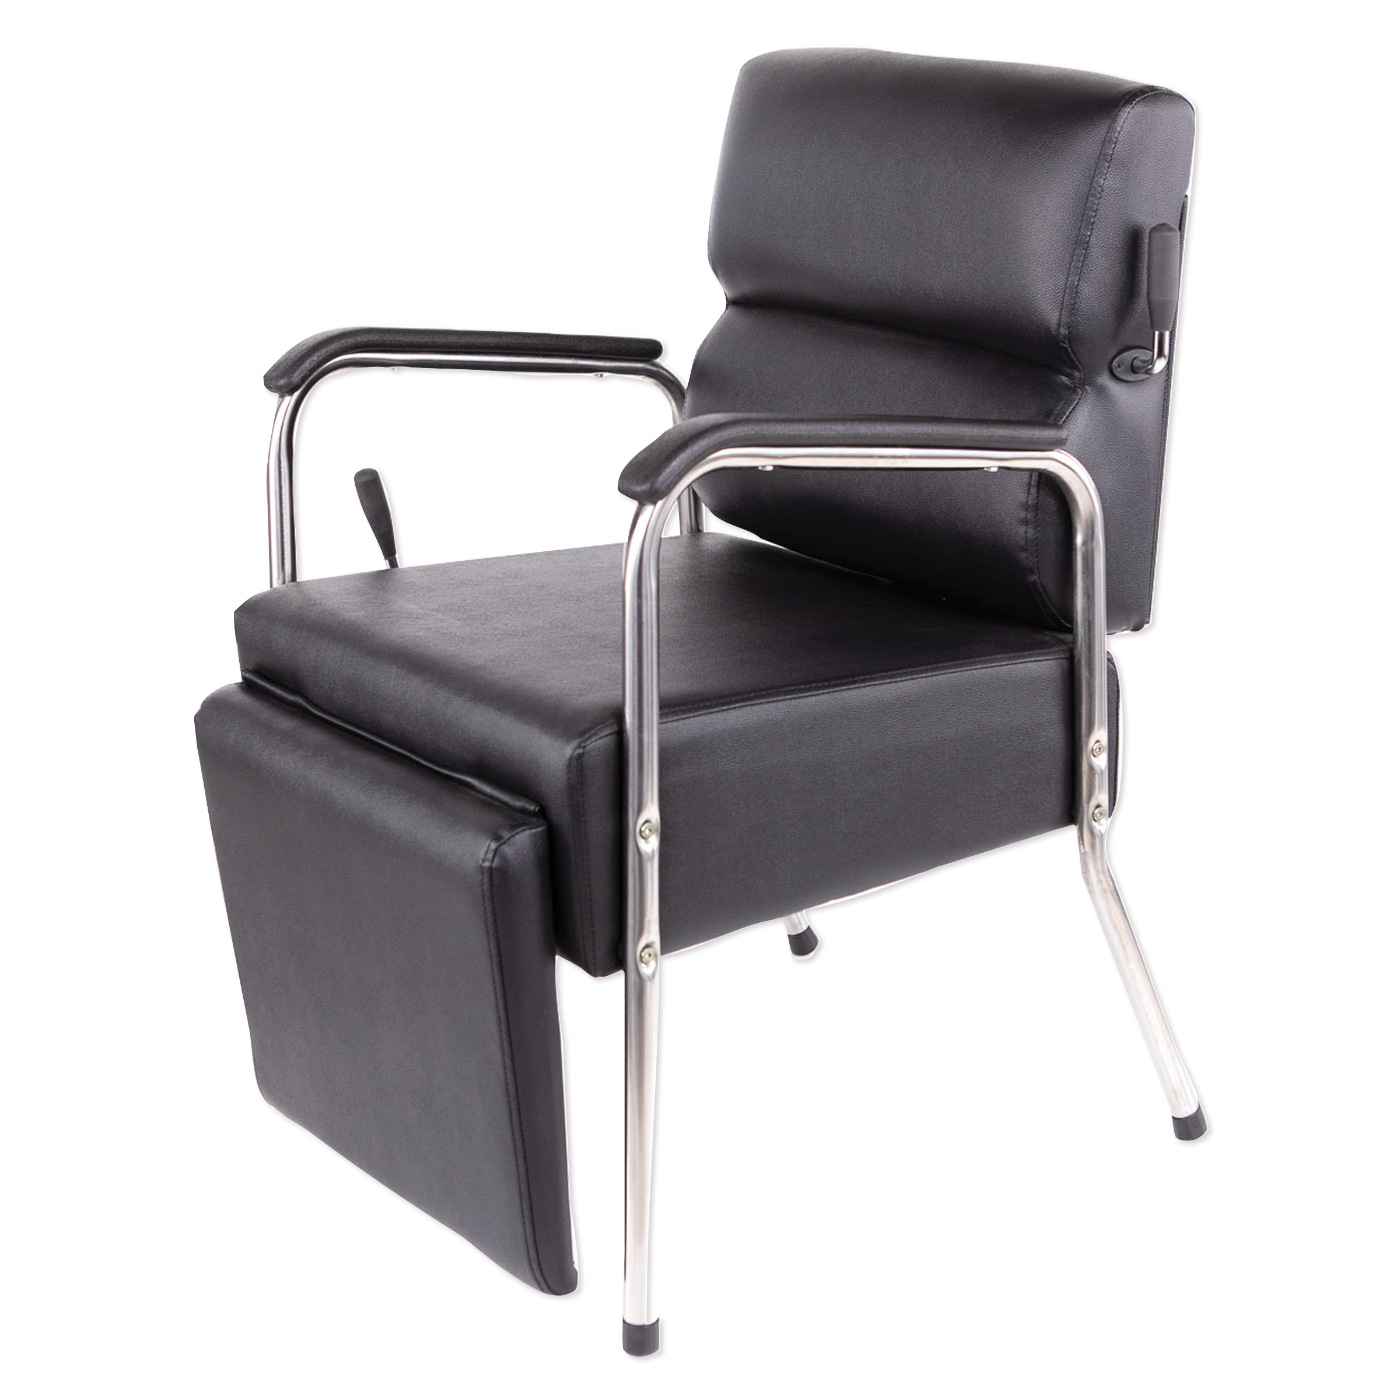 Shampoo Chair with Kick-out Leg Rest